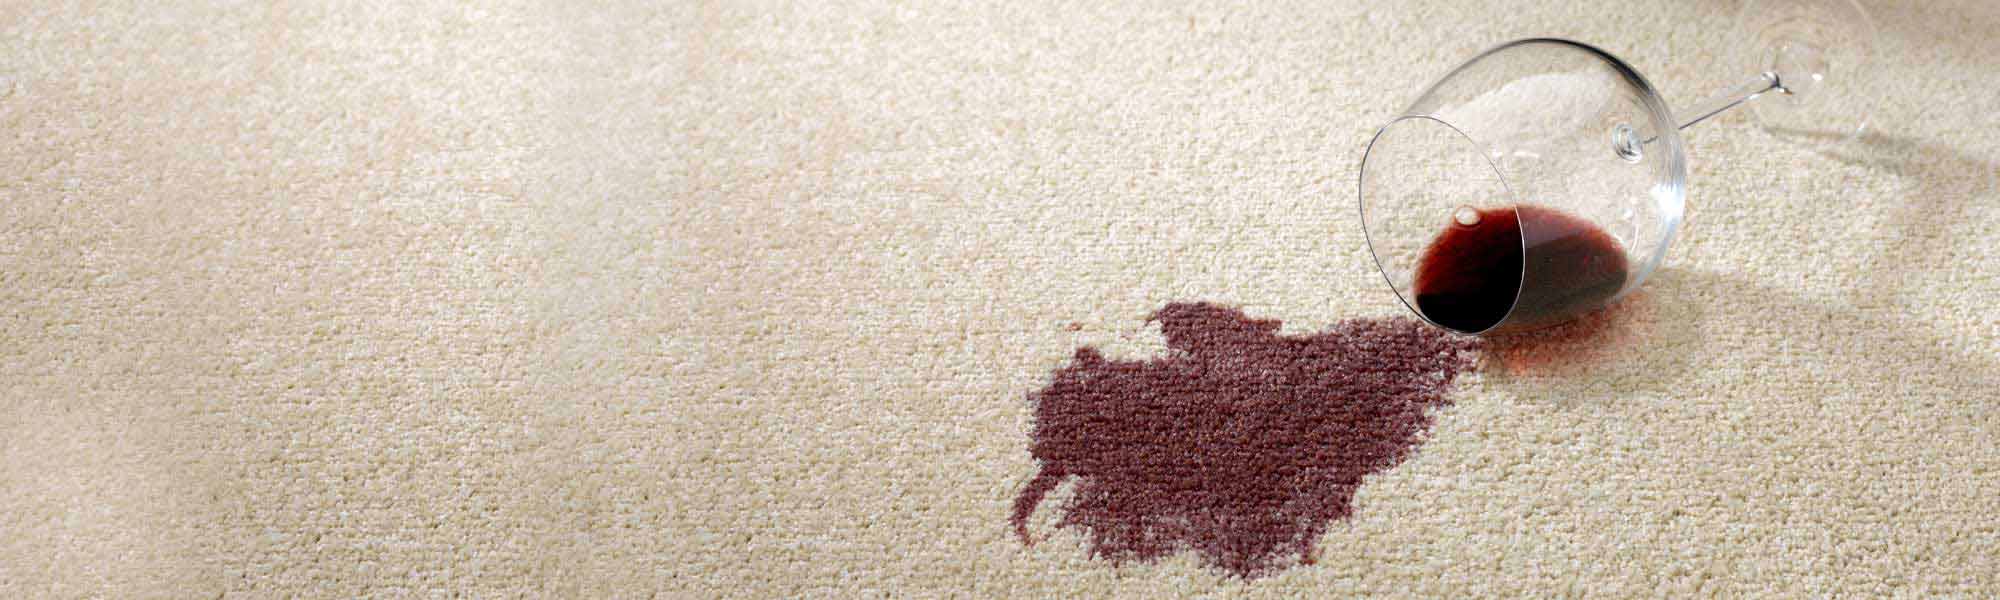 Professional Stain Removal Service by Klein Chem-Dry